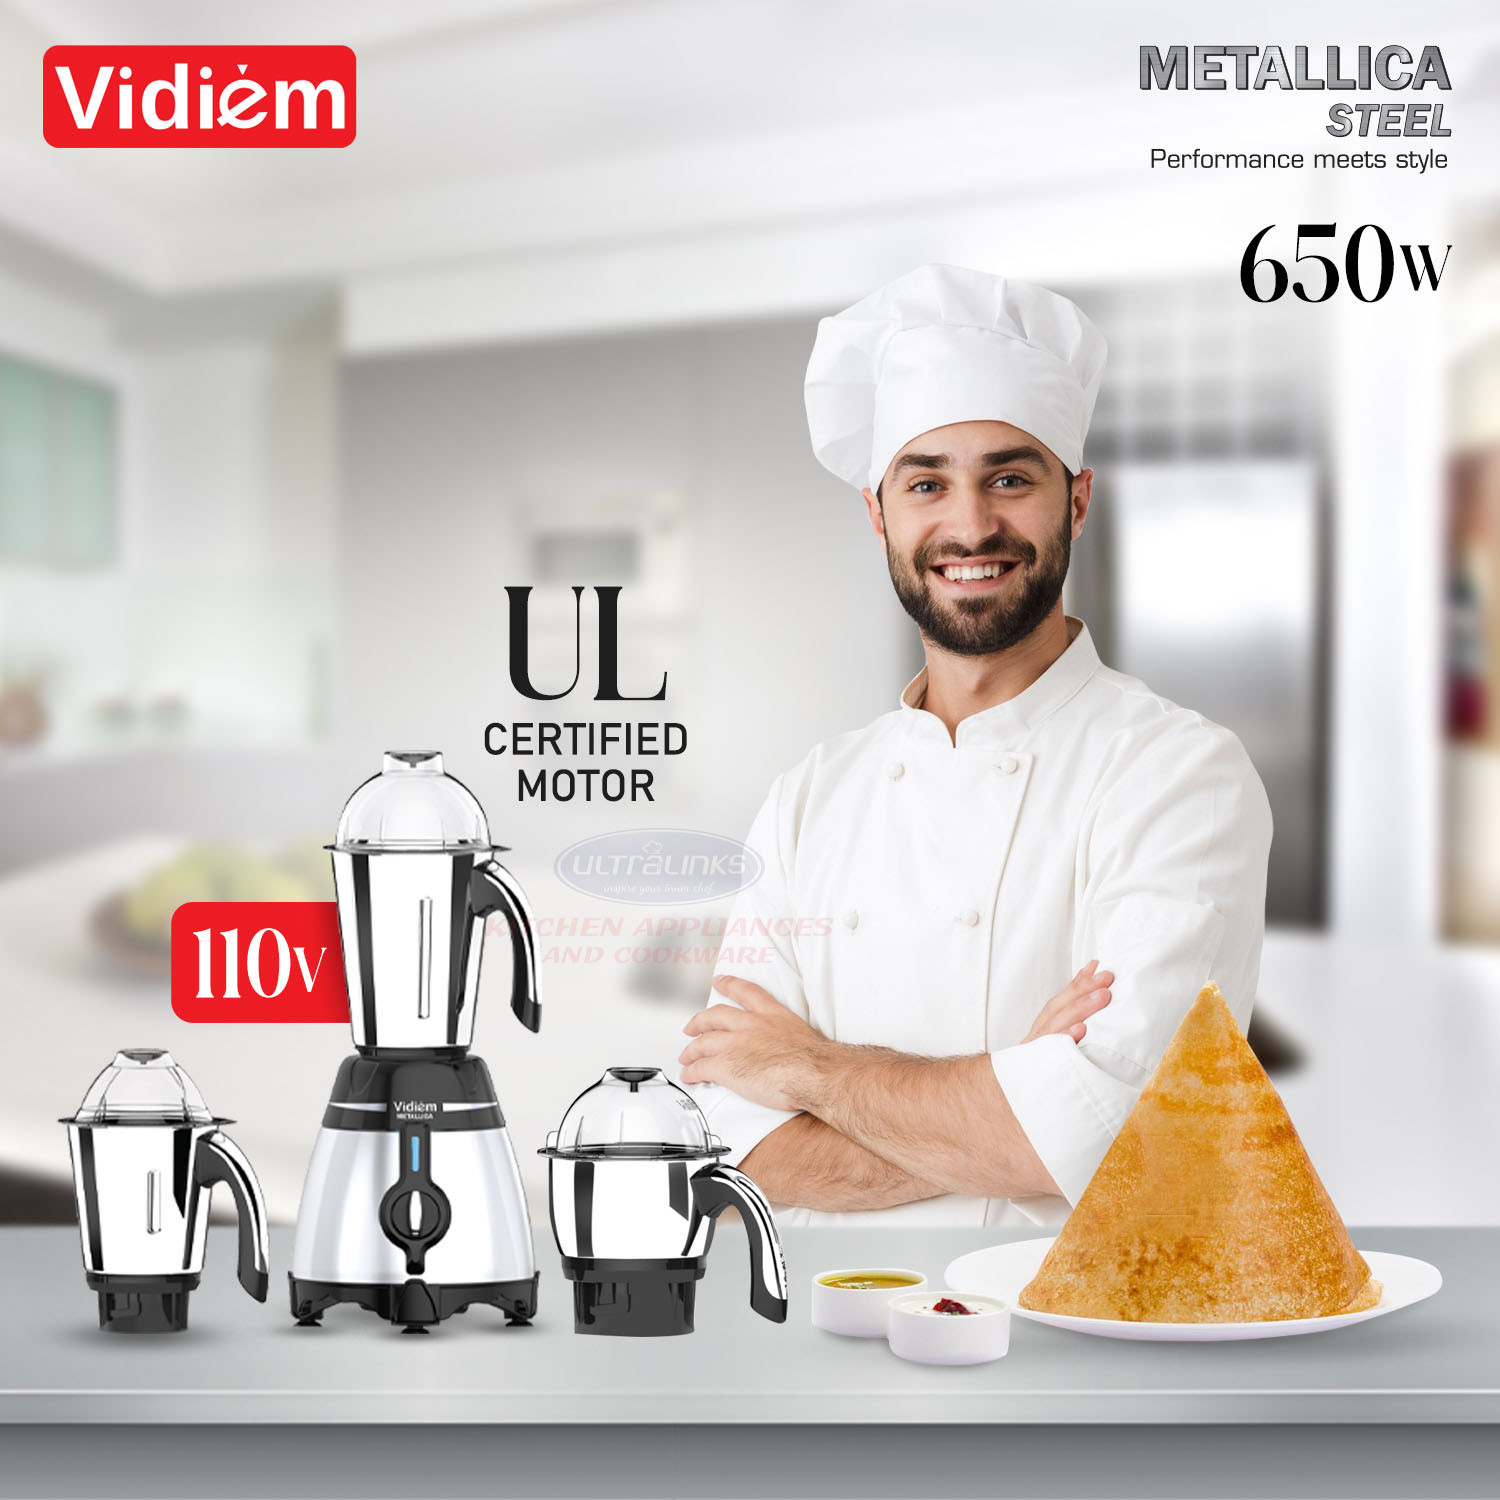 vidiem-metallica-steele-650w-110v-stainless-steel-jars-indian-mixer-grinder-with-spice-coffee-grinder-jar-for-use-in-canada-usa7